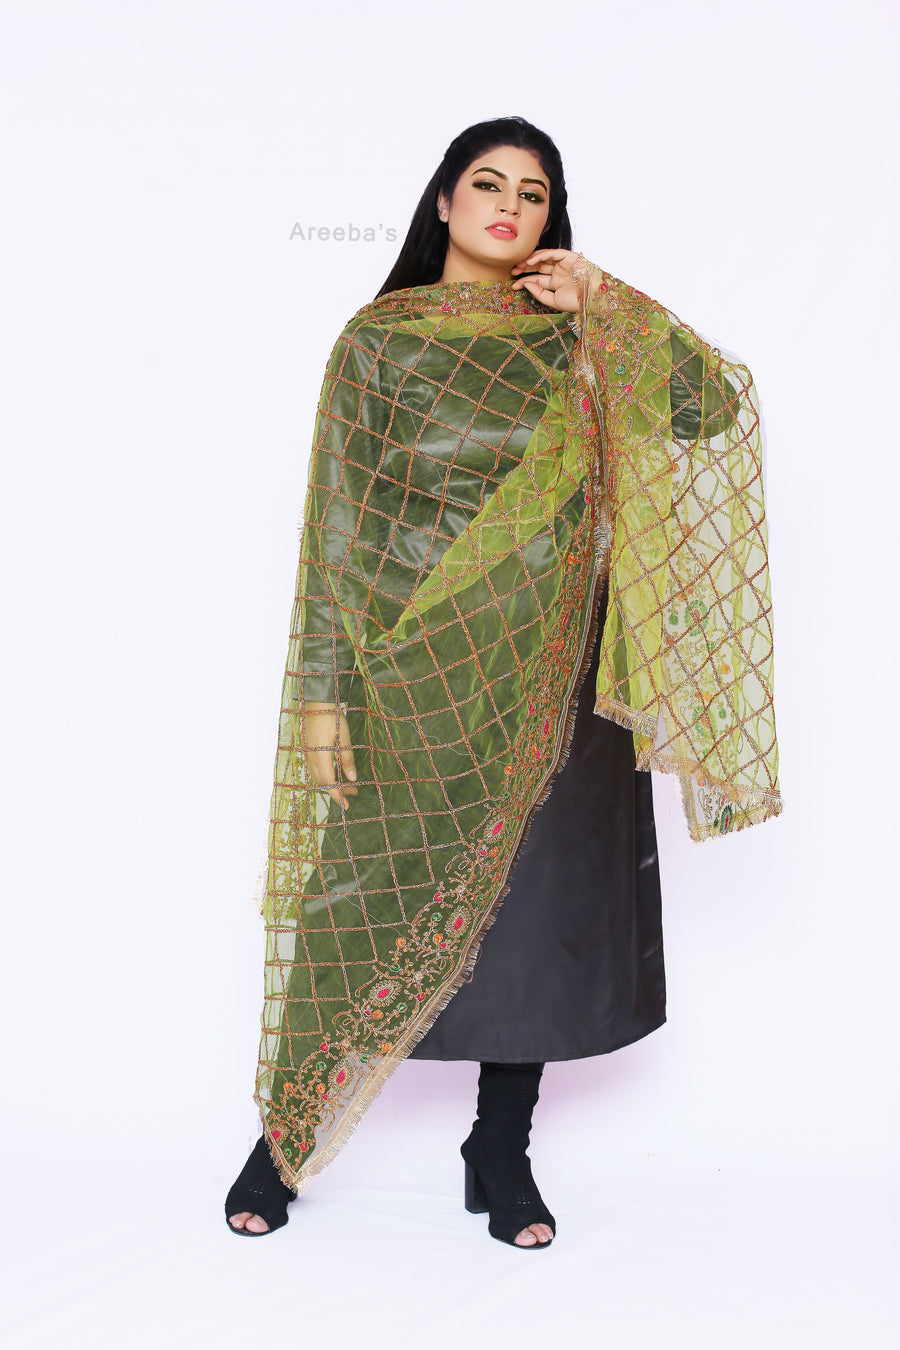 Thistle Green Net- Areeba's Couture